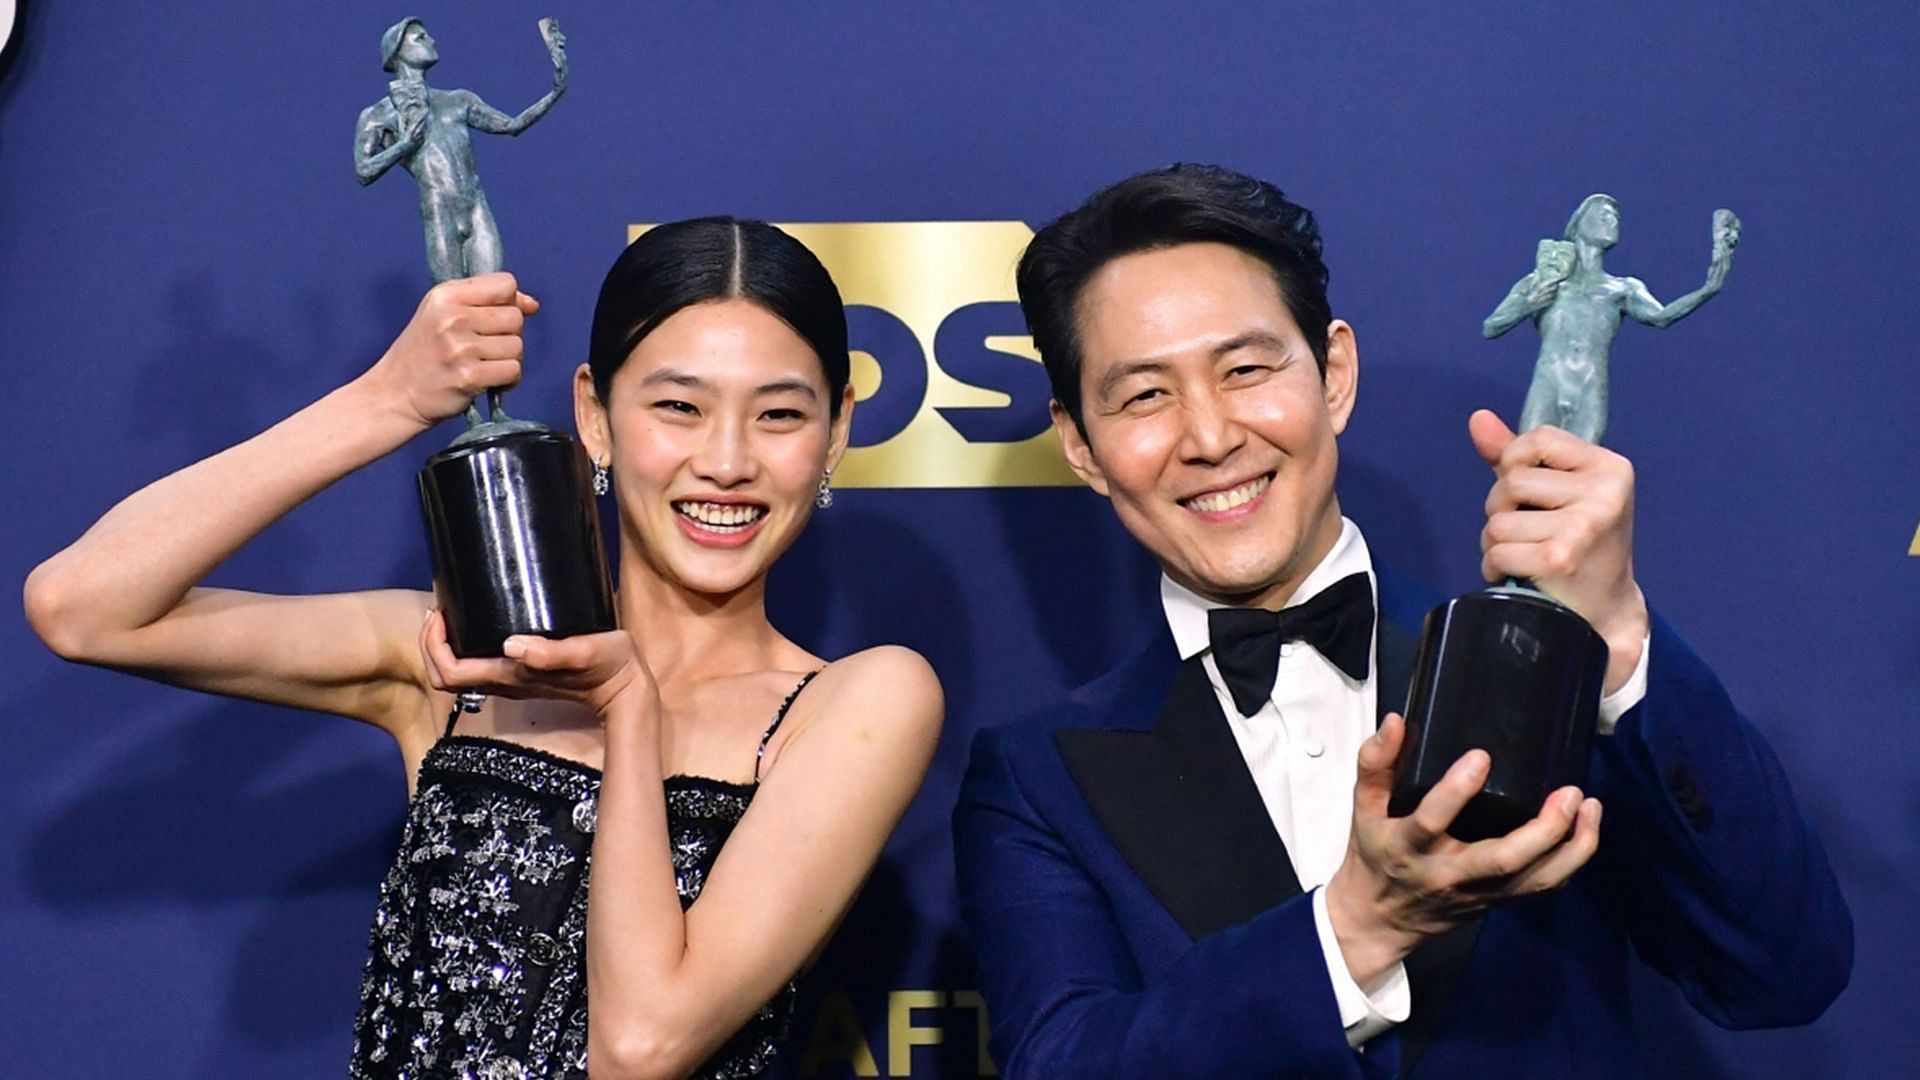 &#039;Squid Game&#039; actors Jung Ho-yeon and Lee Jung-jae at the SAG Awards 2022 (Image via Getty)